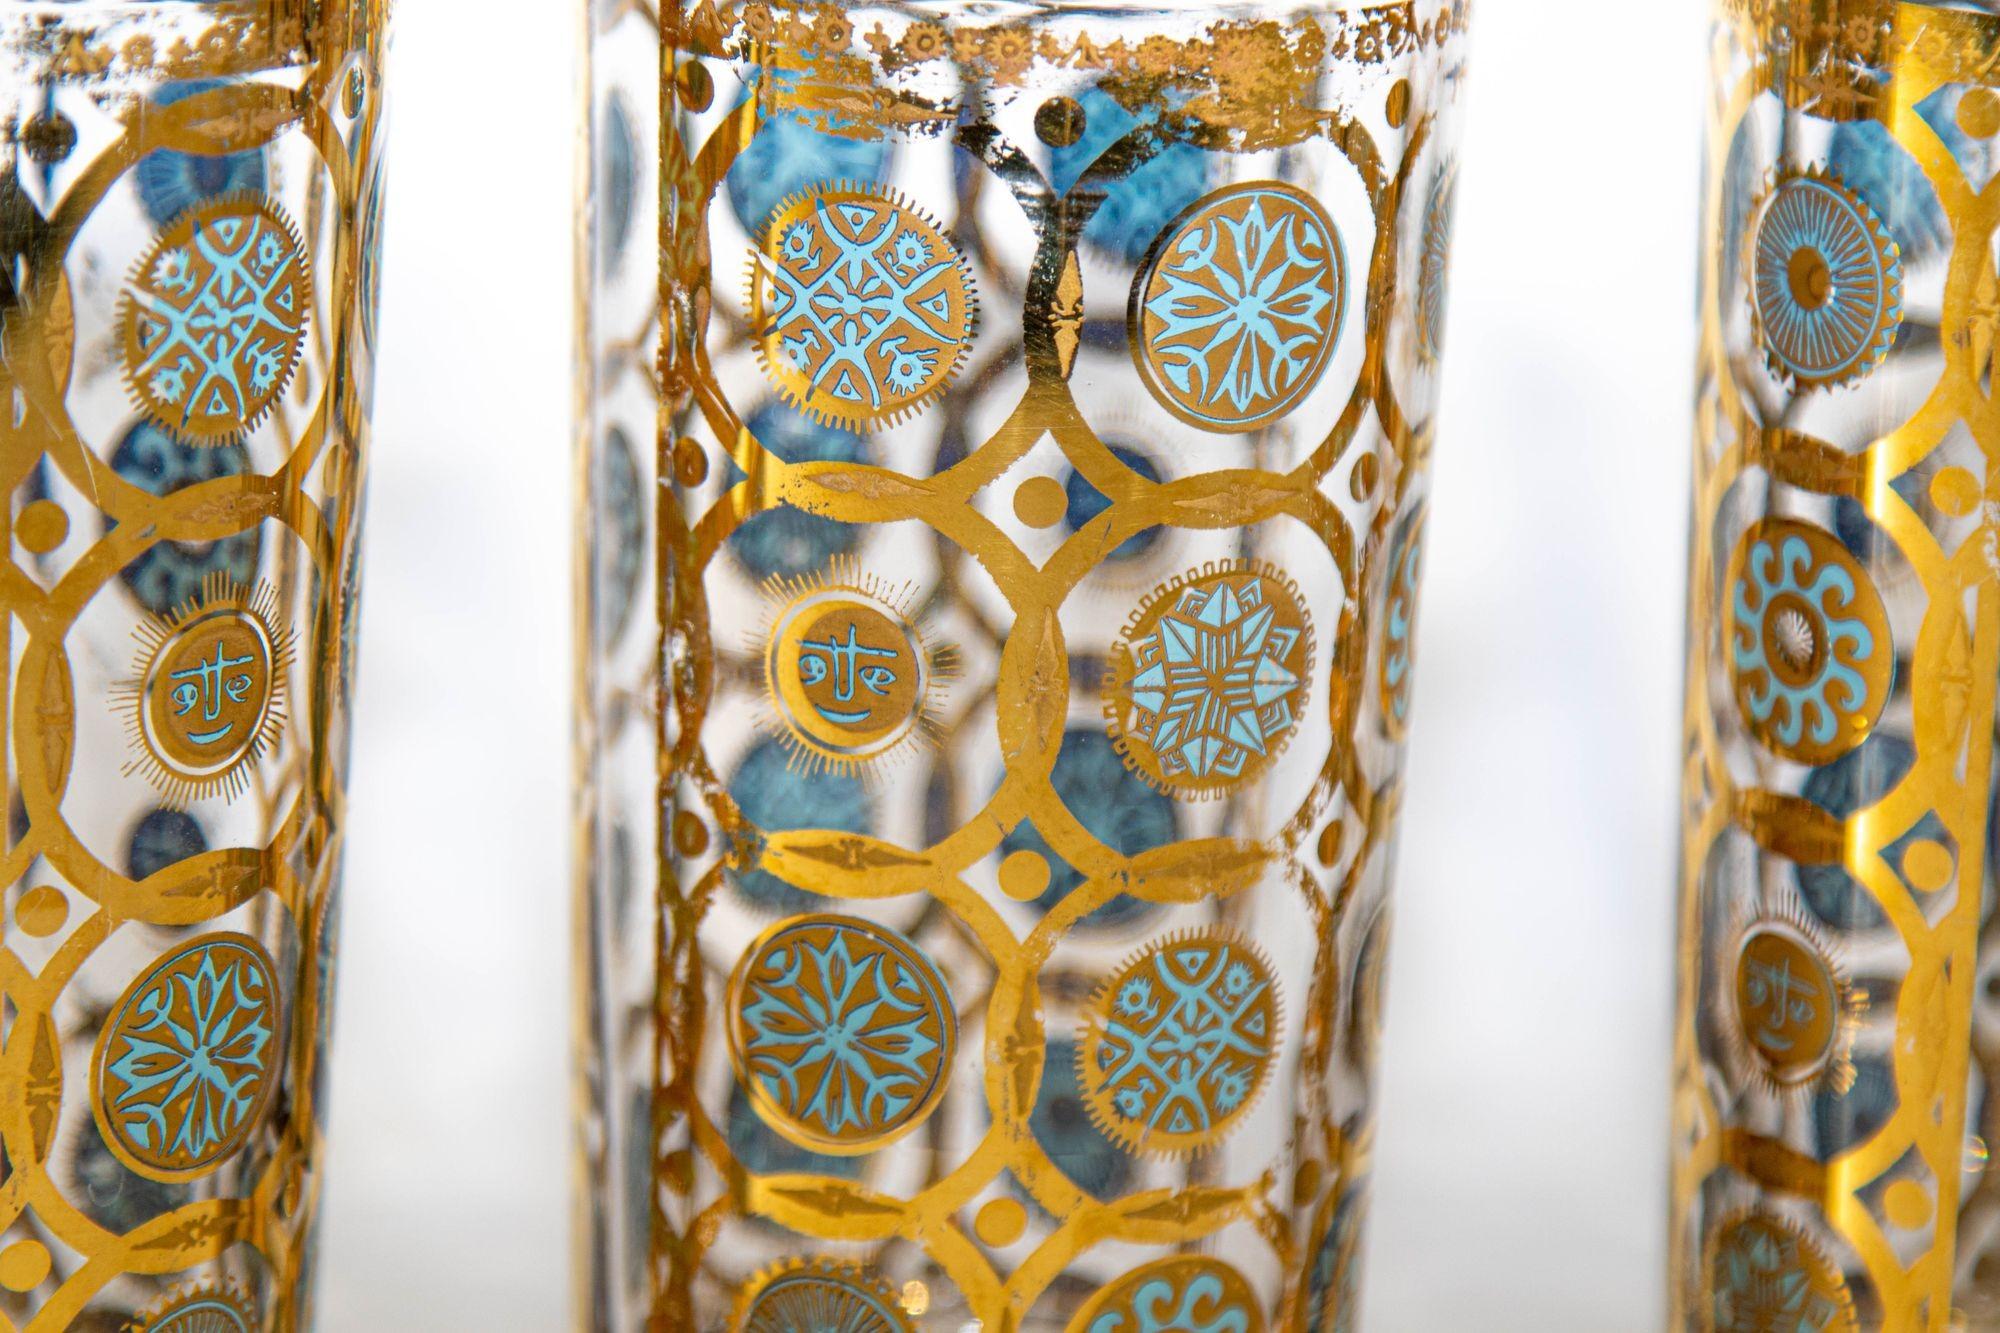 Culver Ltd 22k Gold and Turquoise Signed Glassware Barware Set of 7, circa 1960s 5